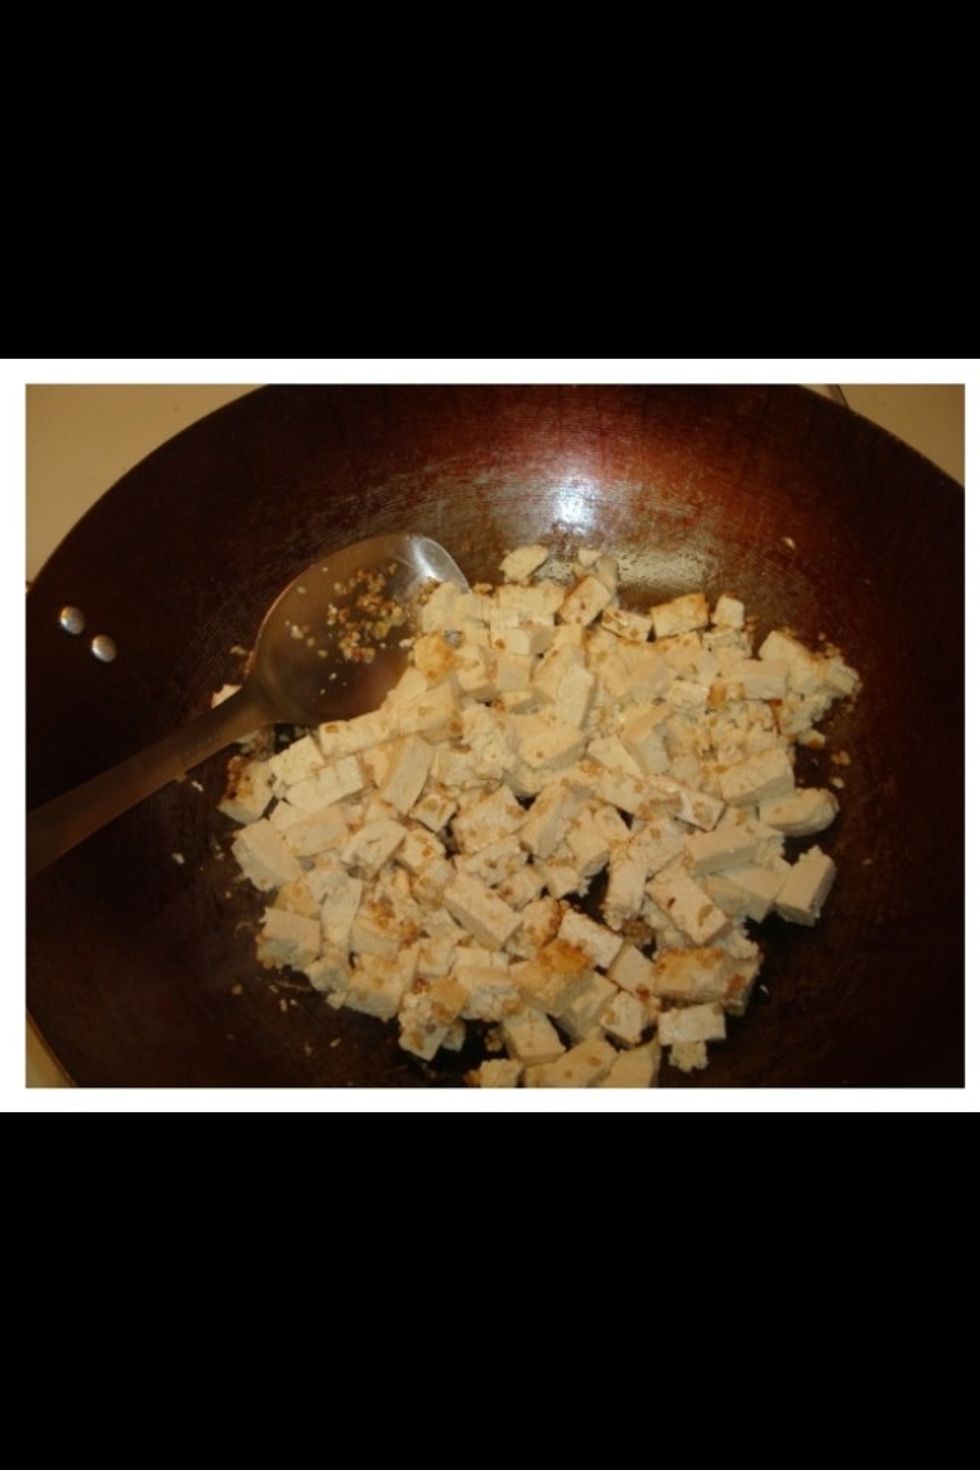 Add the tofu to the garlic and stir fry as it browns.